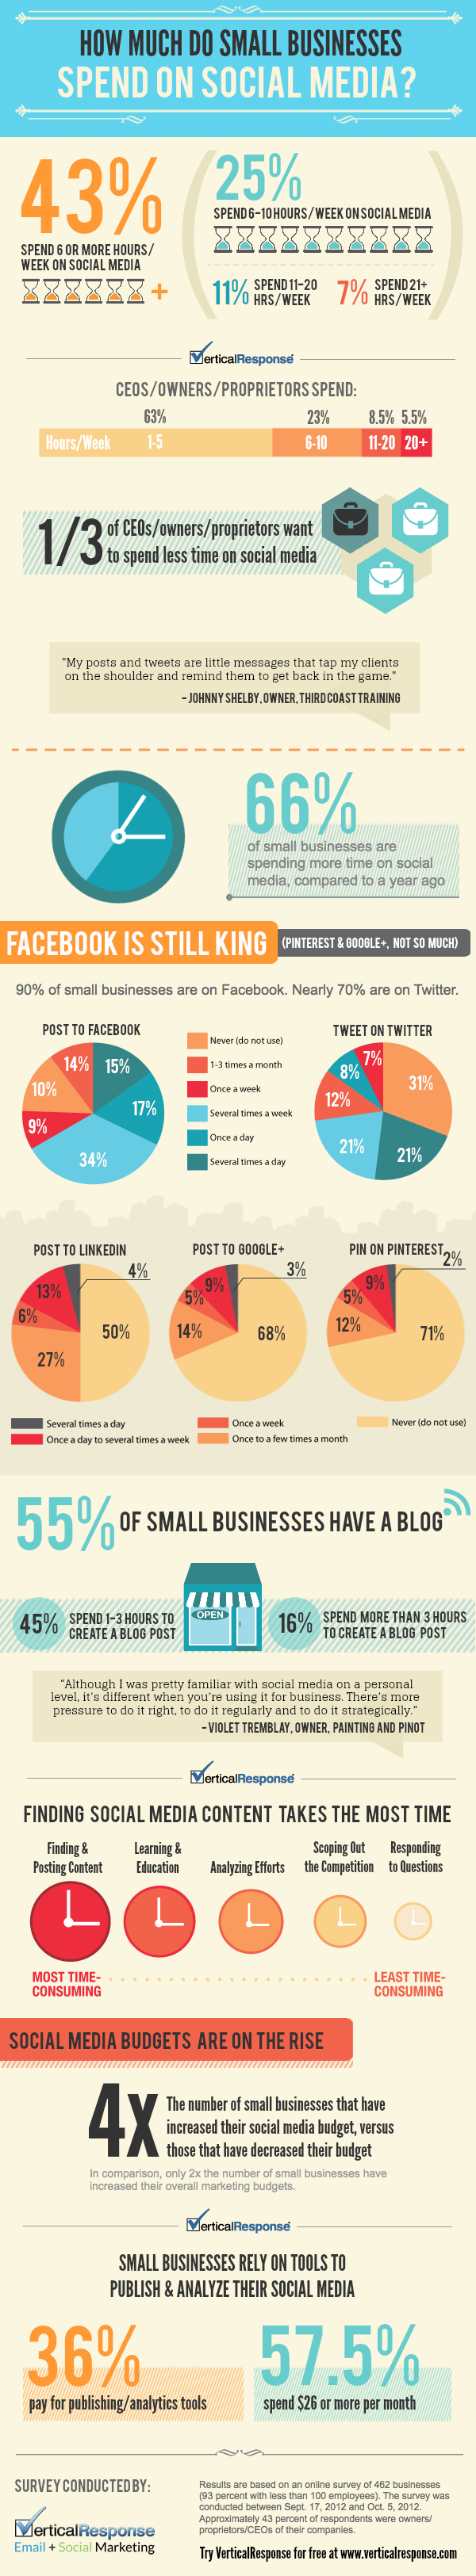 SMEs (Small medium Enterprises) - how much budget do they spend on social media?